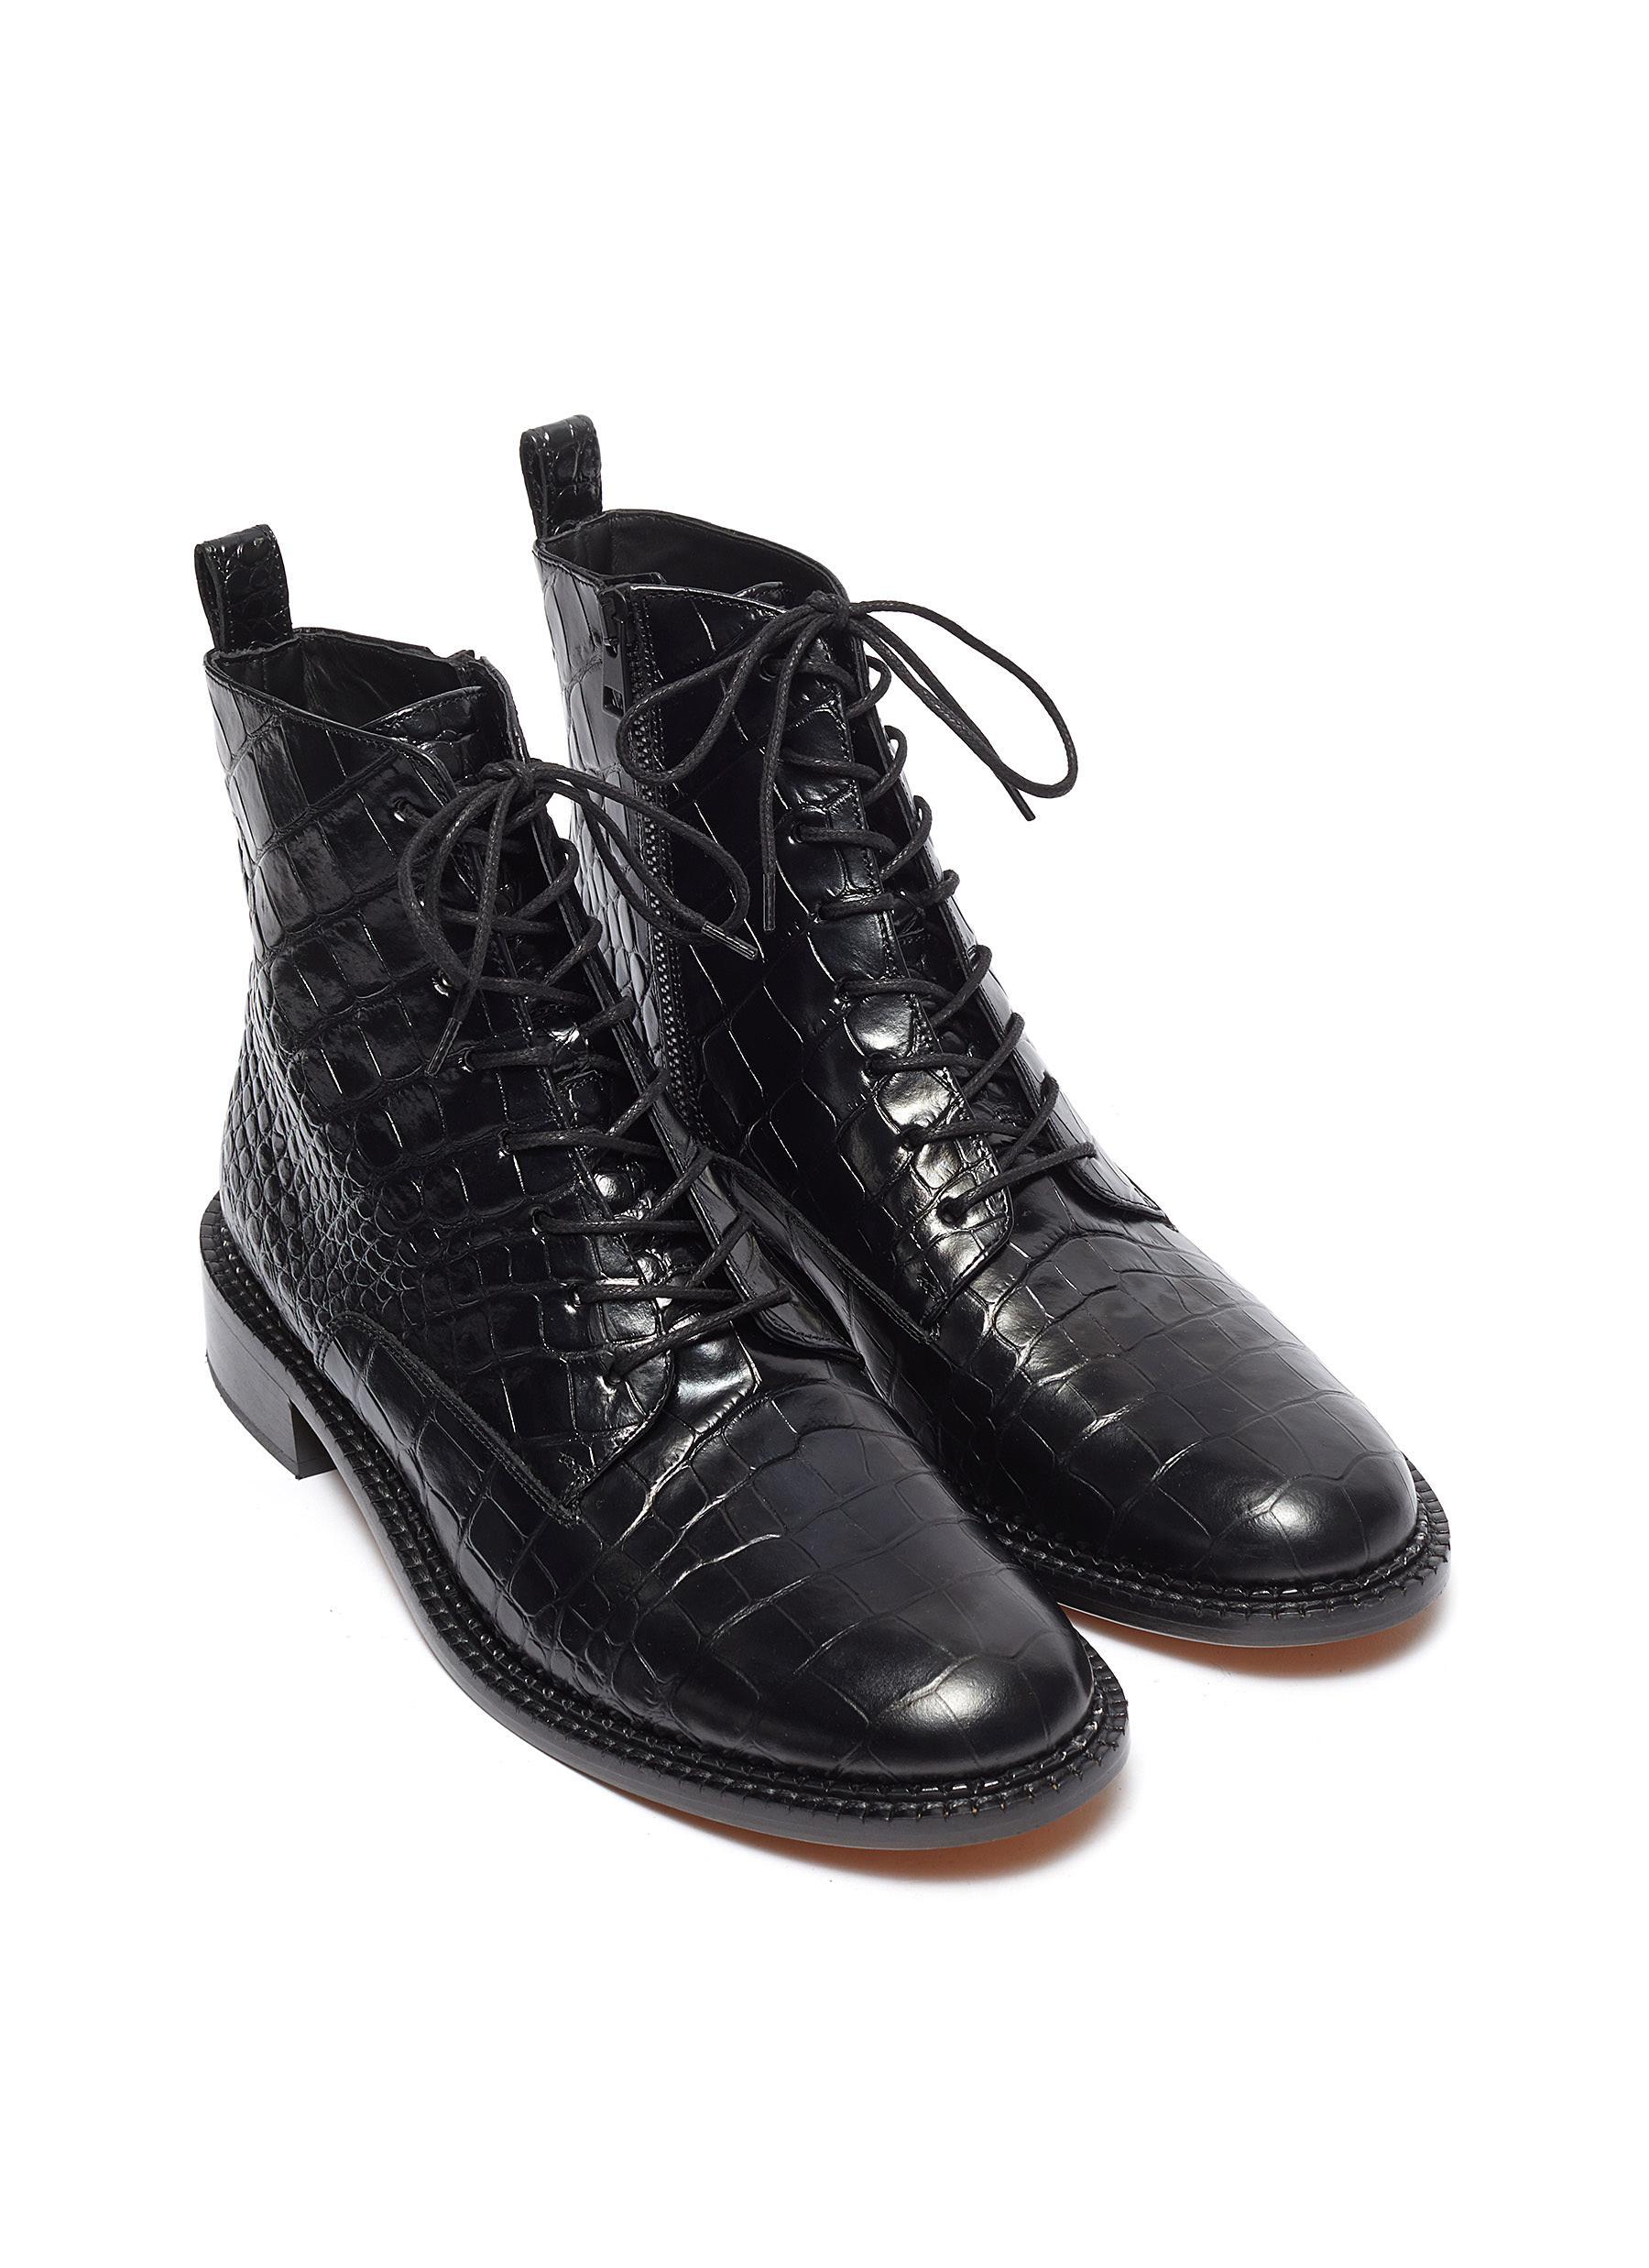 Vince 'cabria' Croc Embossed Leather Combat Boots in Black Croc Print ...